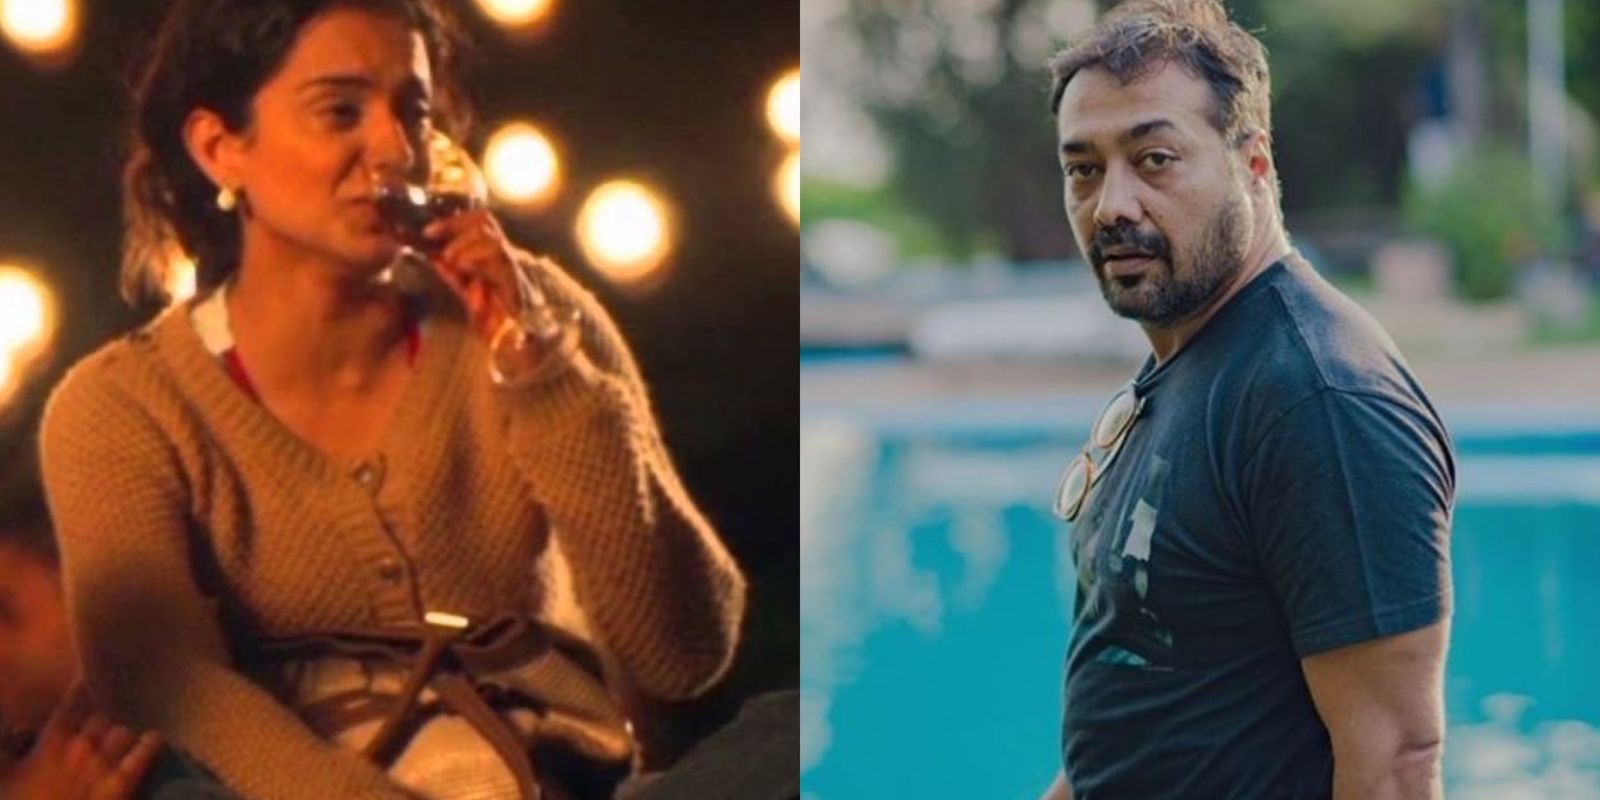 Anurag Kashyap Says He Has Seen Kangana Ranaut 'Do Things', Claims She Drank Champagne To Improvise Lines For Queen 